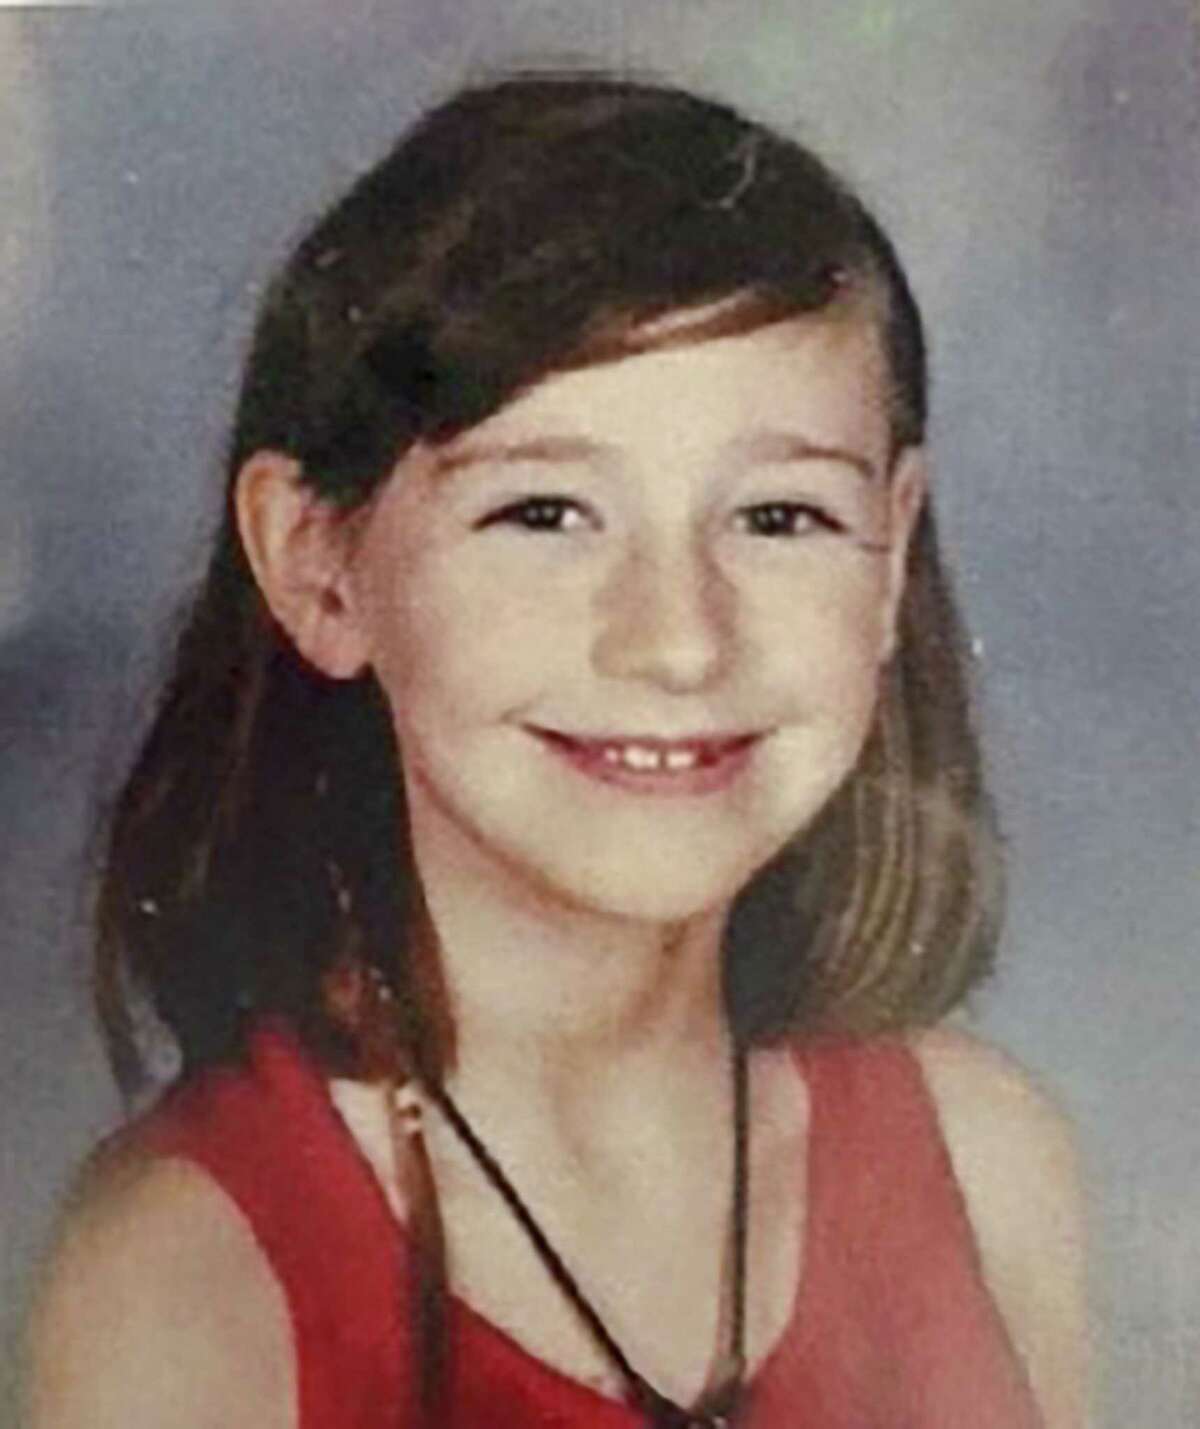 This undated photo provided by the Santa Cruz Police Department shows Madyson “Maddy” Middleton, from Santa Cruz, Calif.